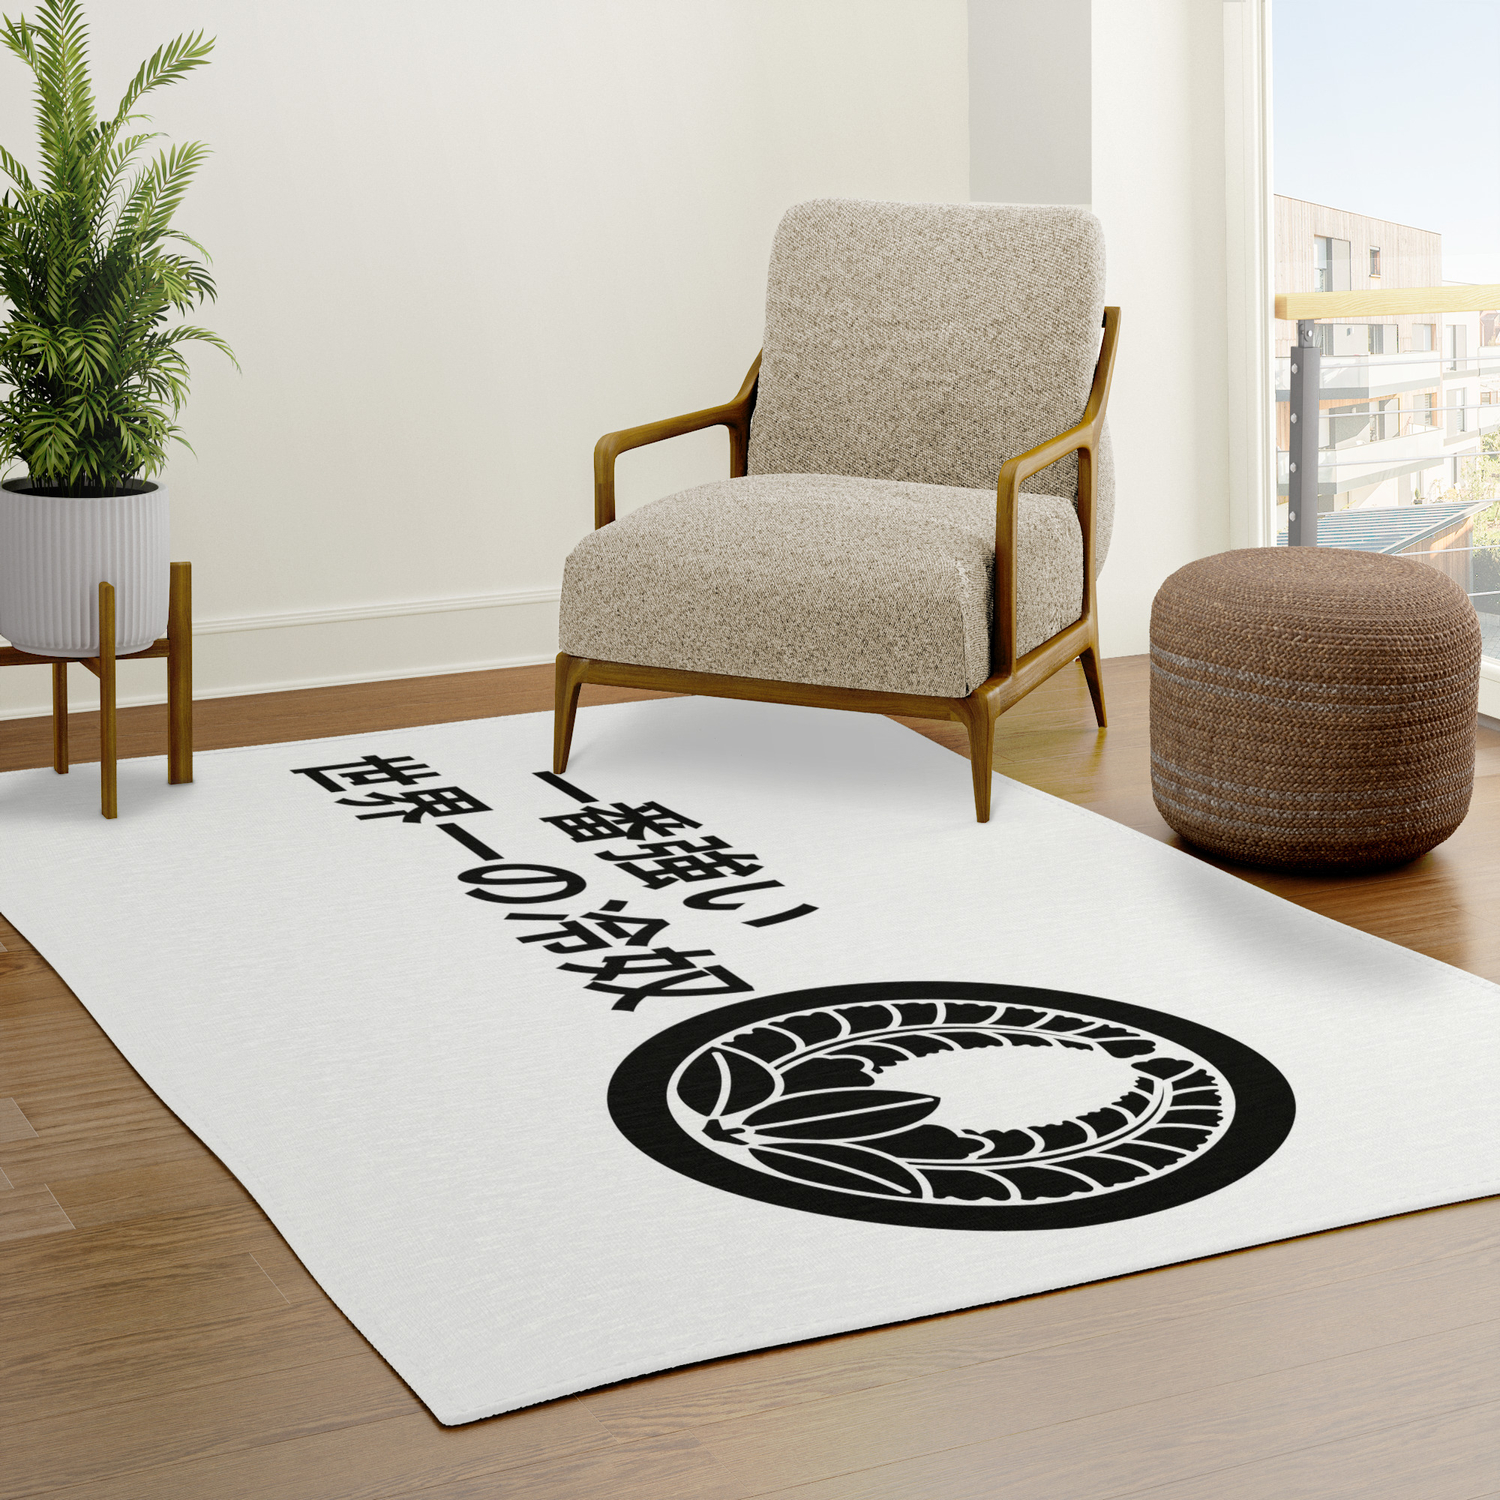 Logo Right Version With Black Ink, Cool Rugs For Guys